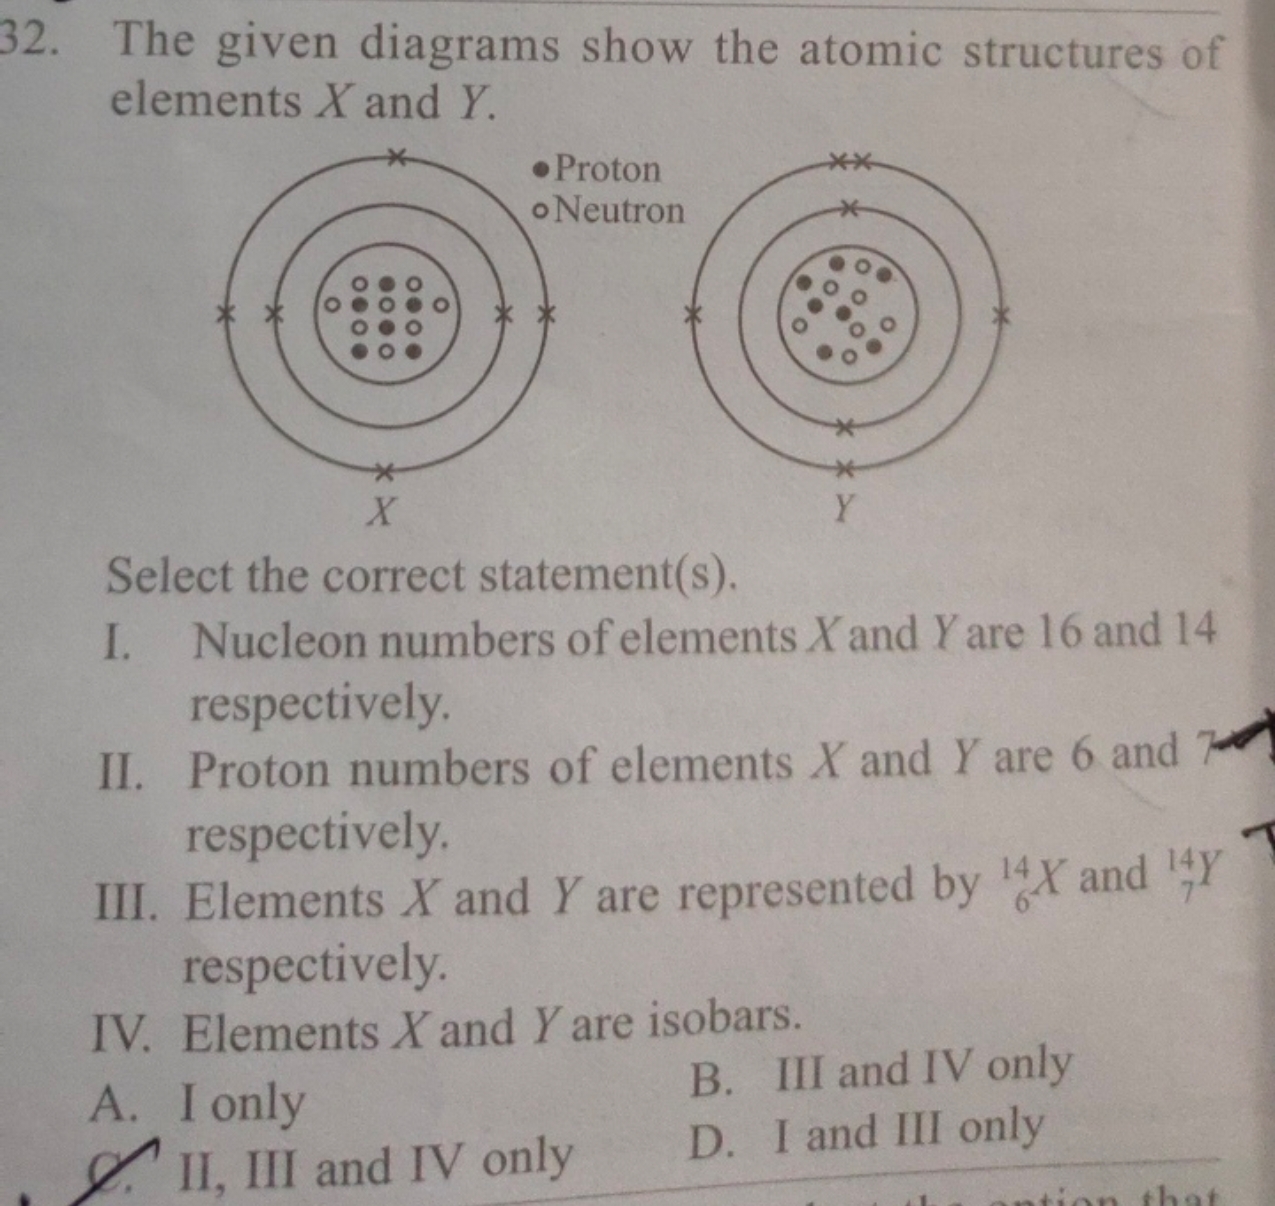 The given diagrams show the atomic structures of elements X and Y. Sel